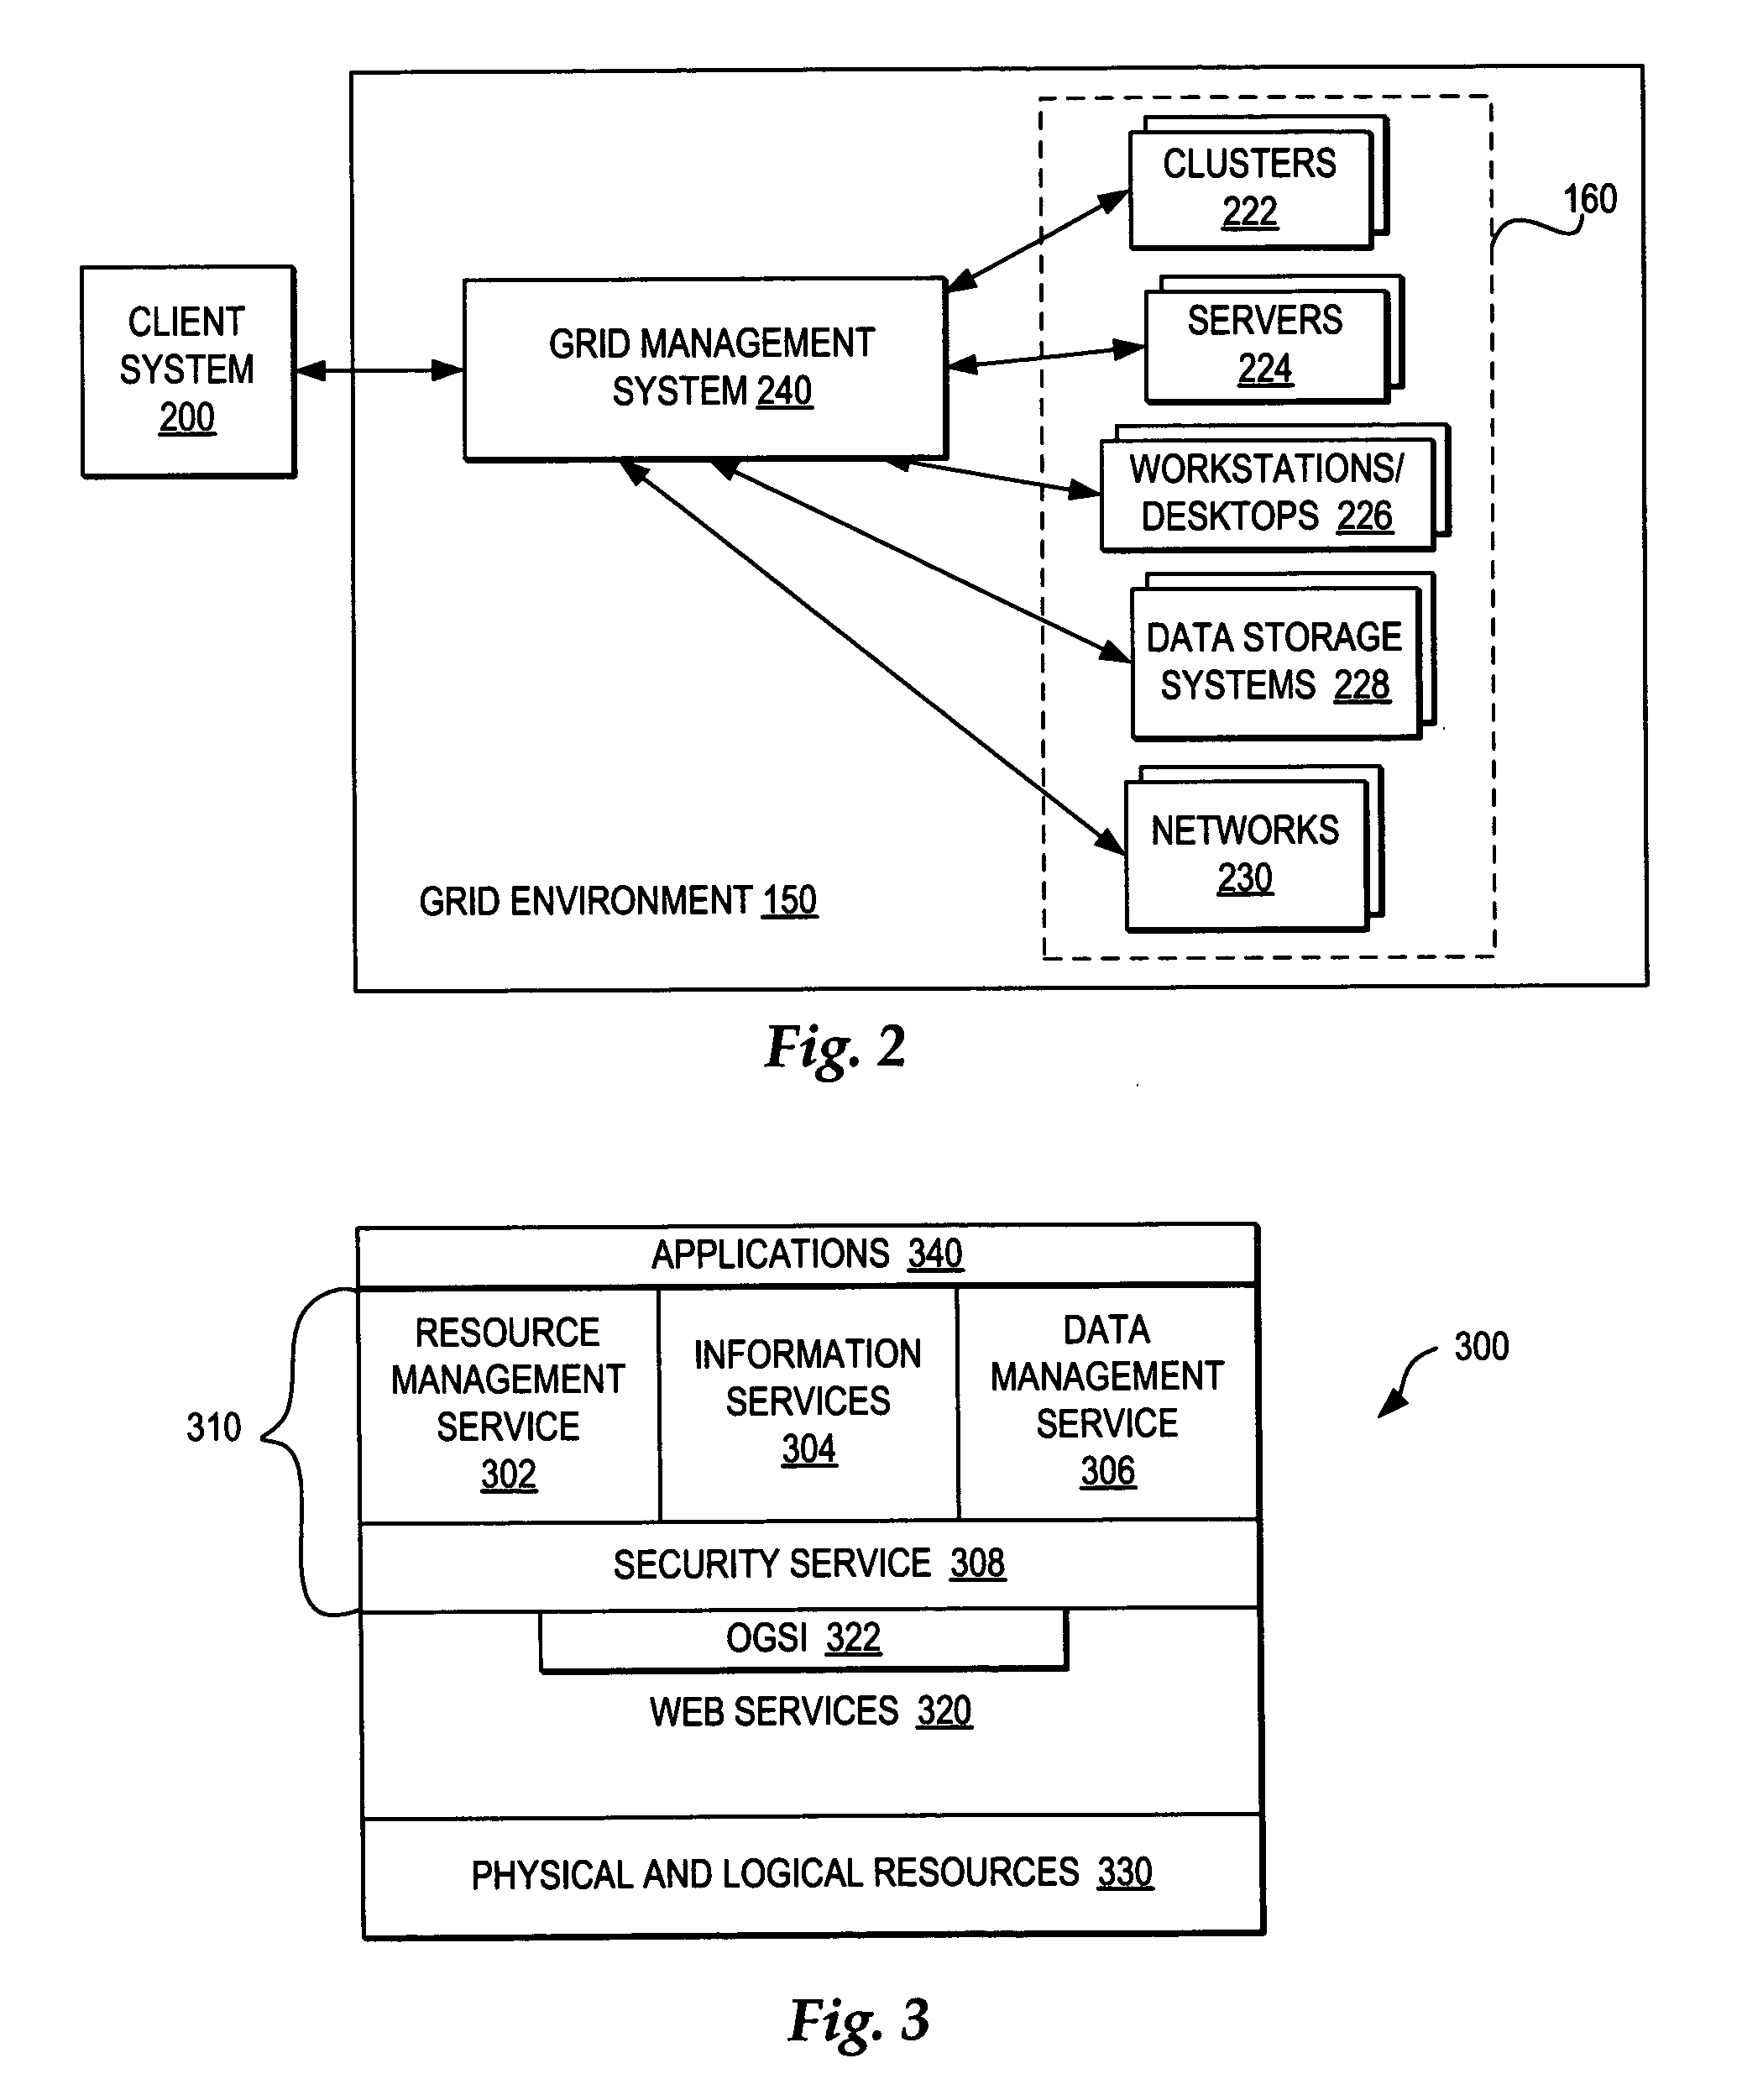 Managing network errors communicated in a message transaction with error information using a troubleshooting agent